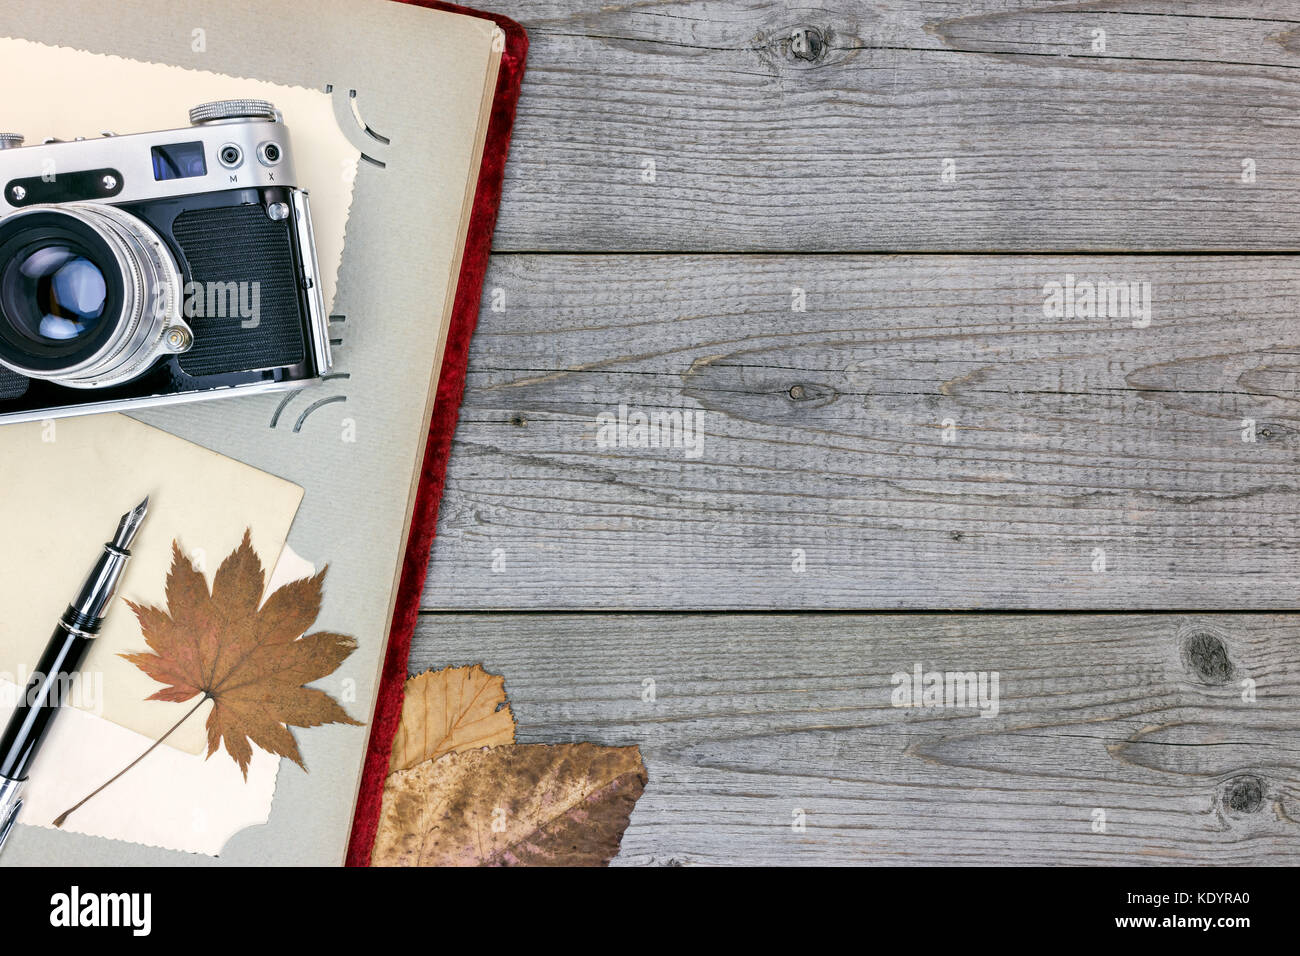 still retro camera, photo album, pen and yellow leaves on grunge wooden background Stock Photo